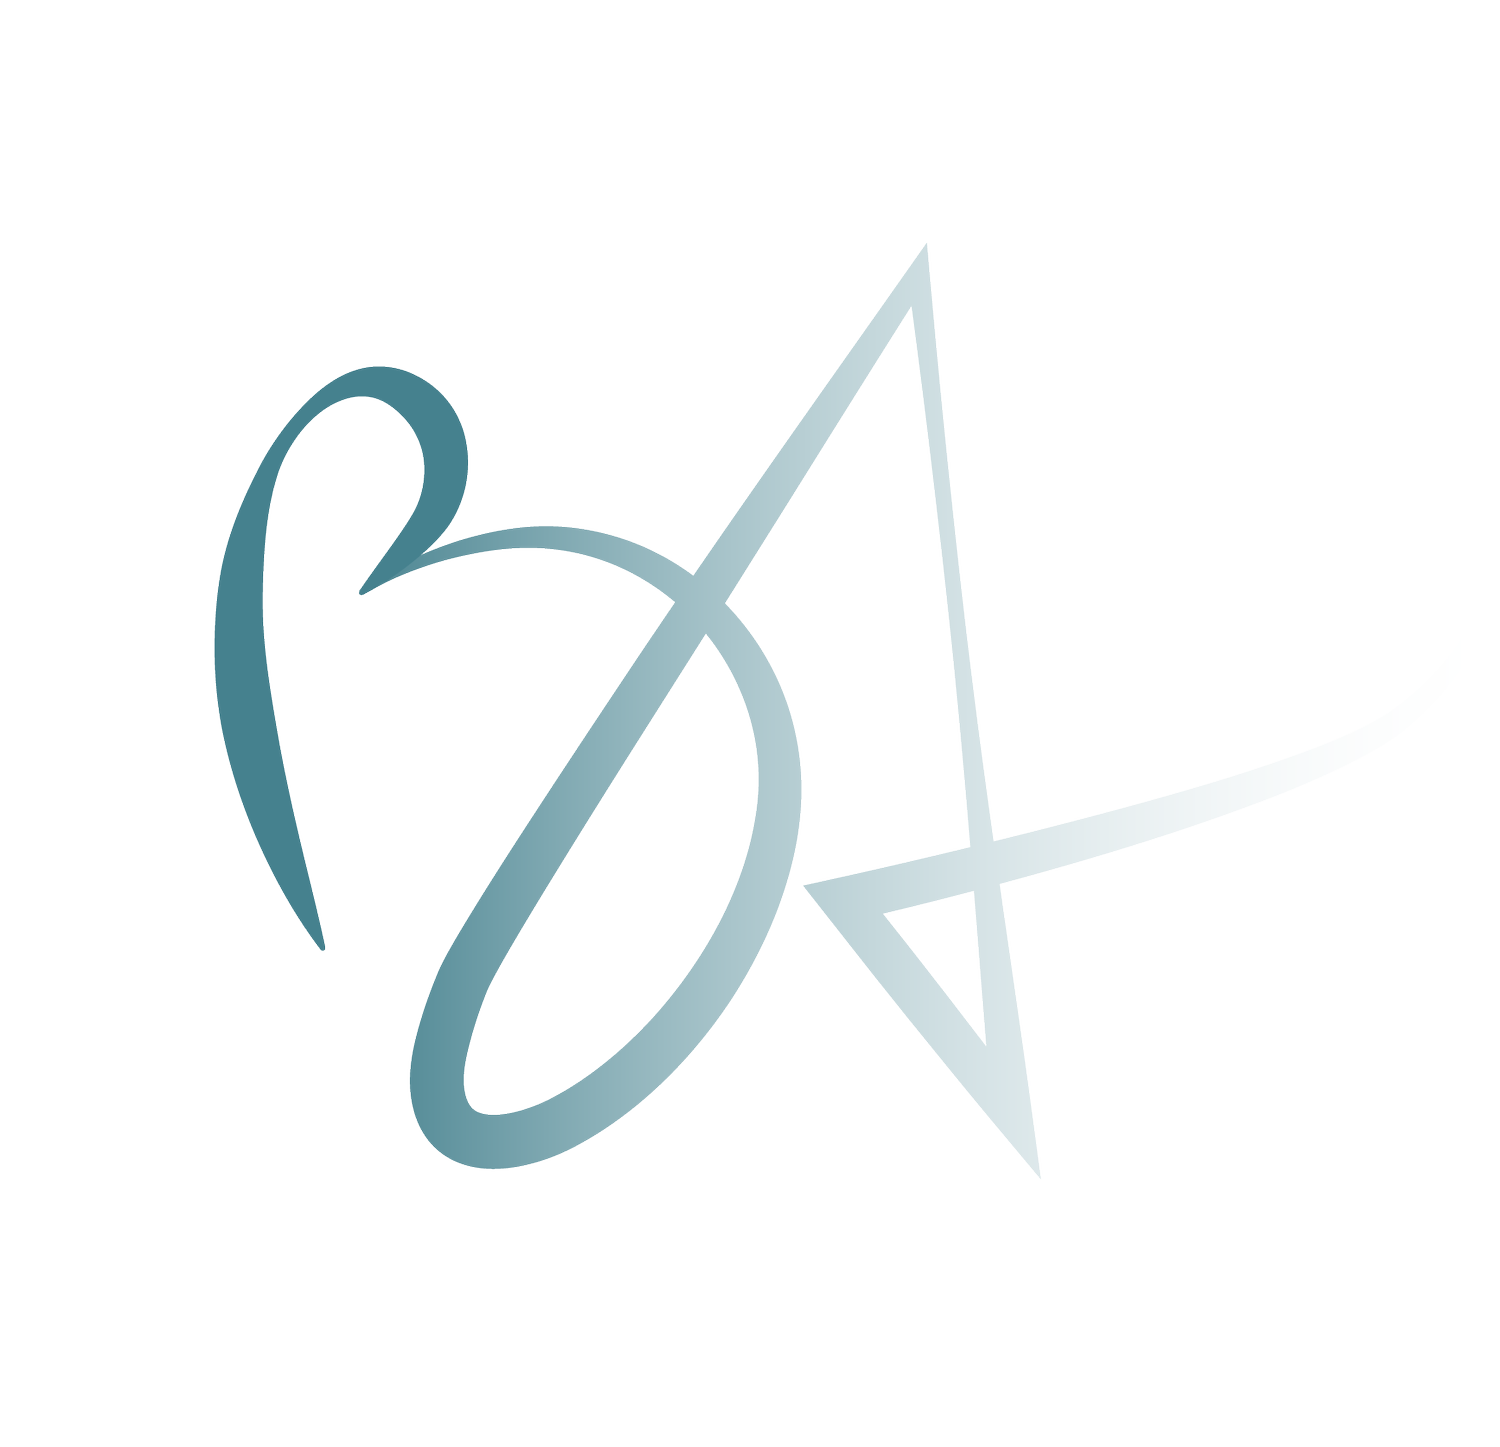 Banks &amp; Associates | Proven Construction Consultants | Safety, Compliance, Oversight